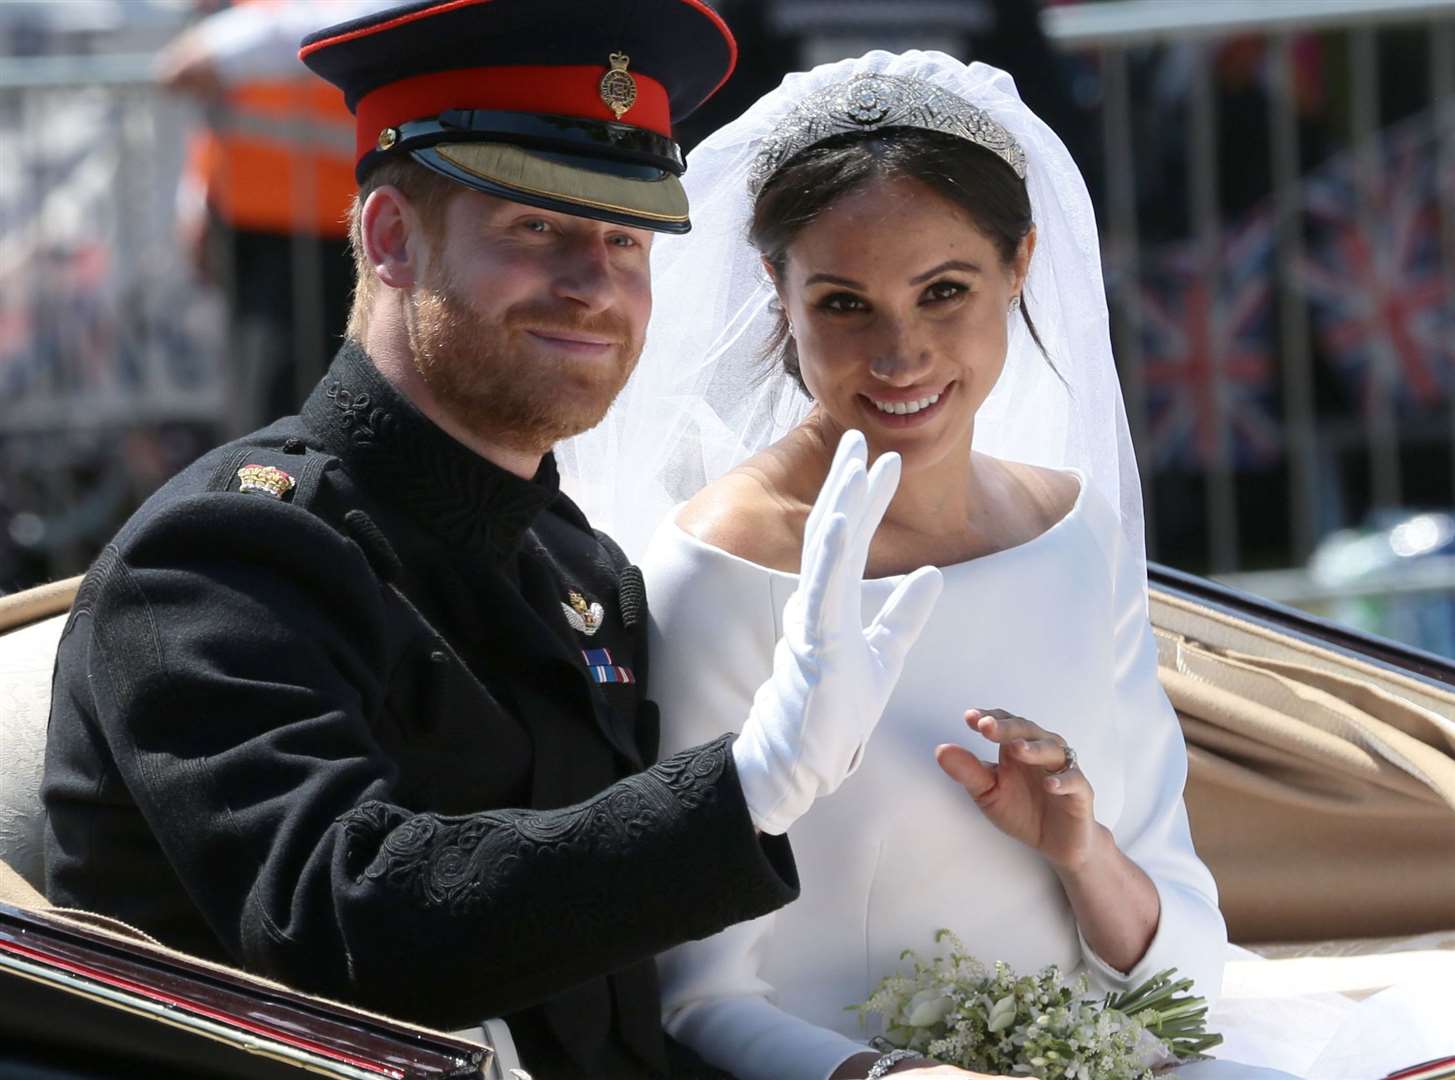 Pub opening hours were last extended by the government for Prince Harry's wedding in 2018. Picture: Aaron Chown/PA Wire